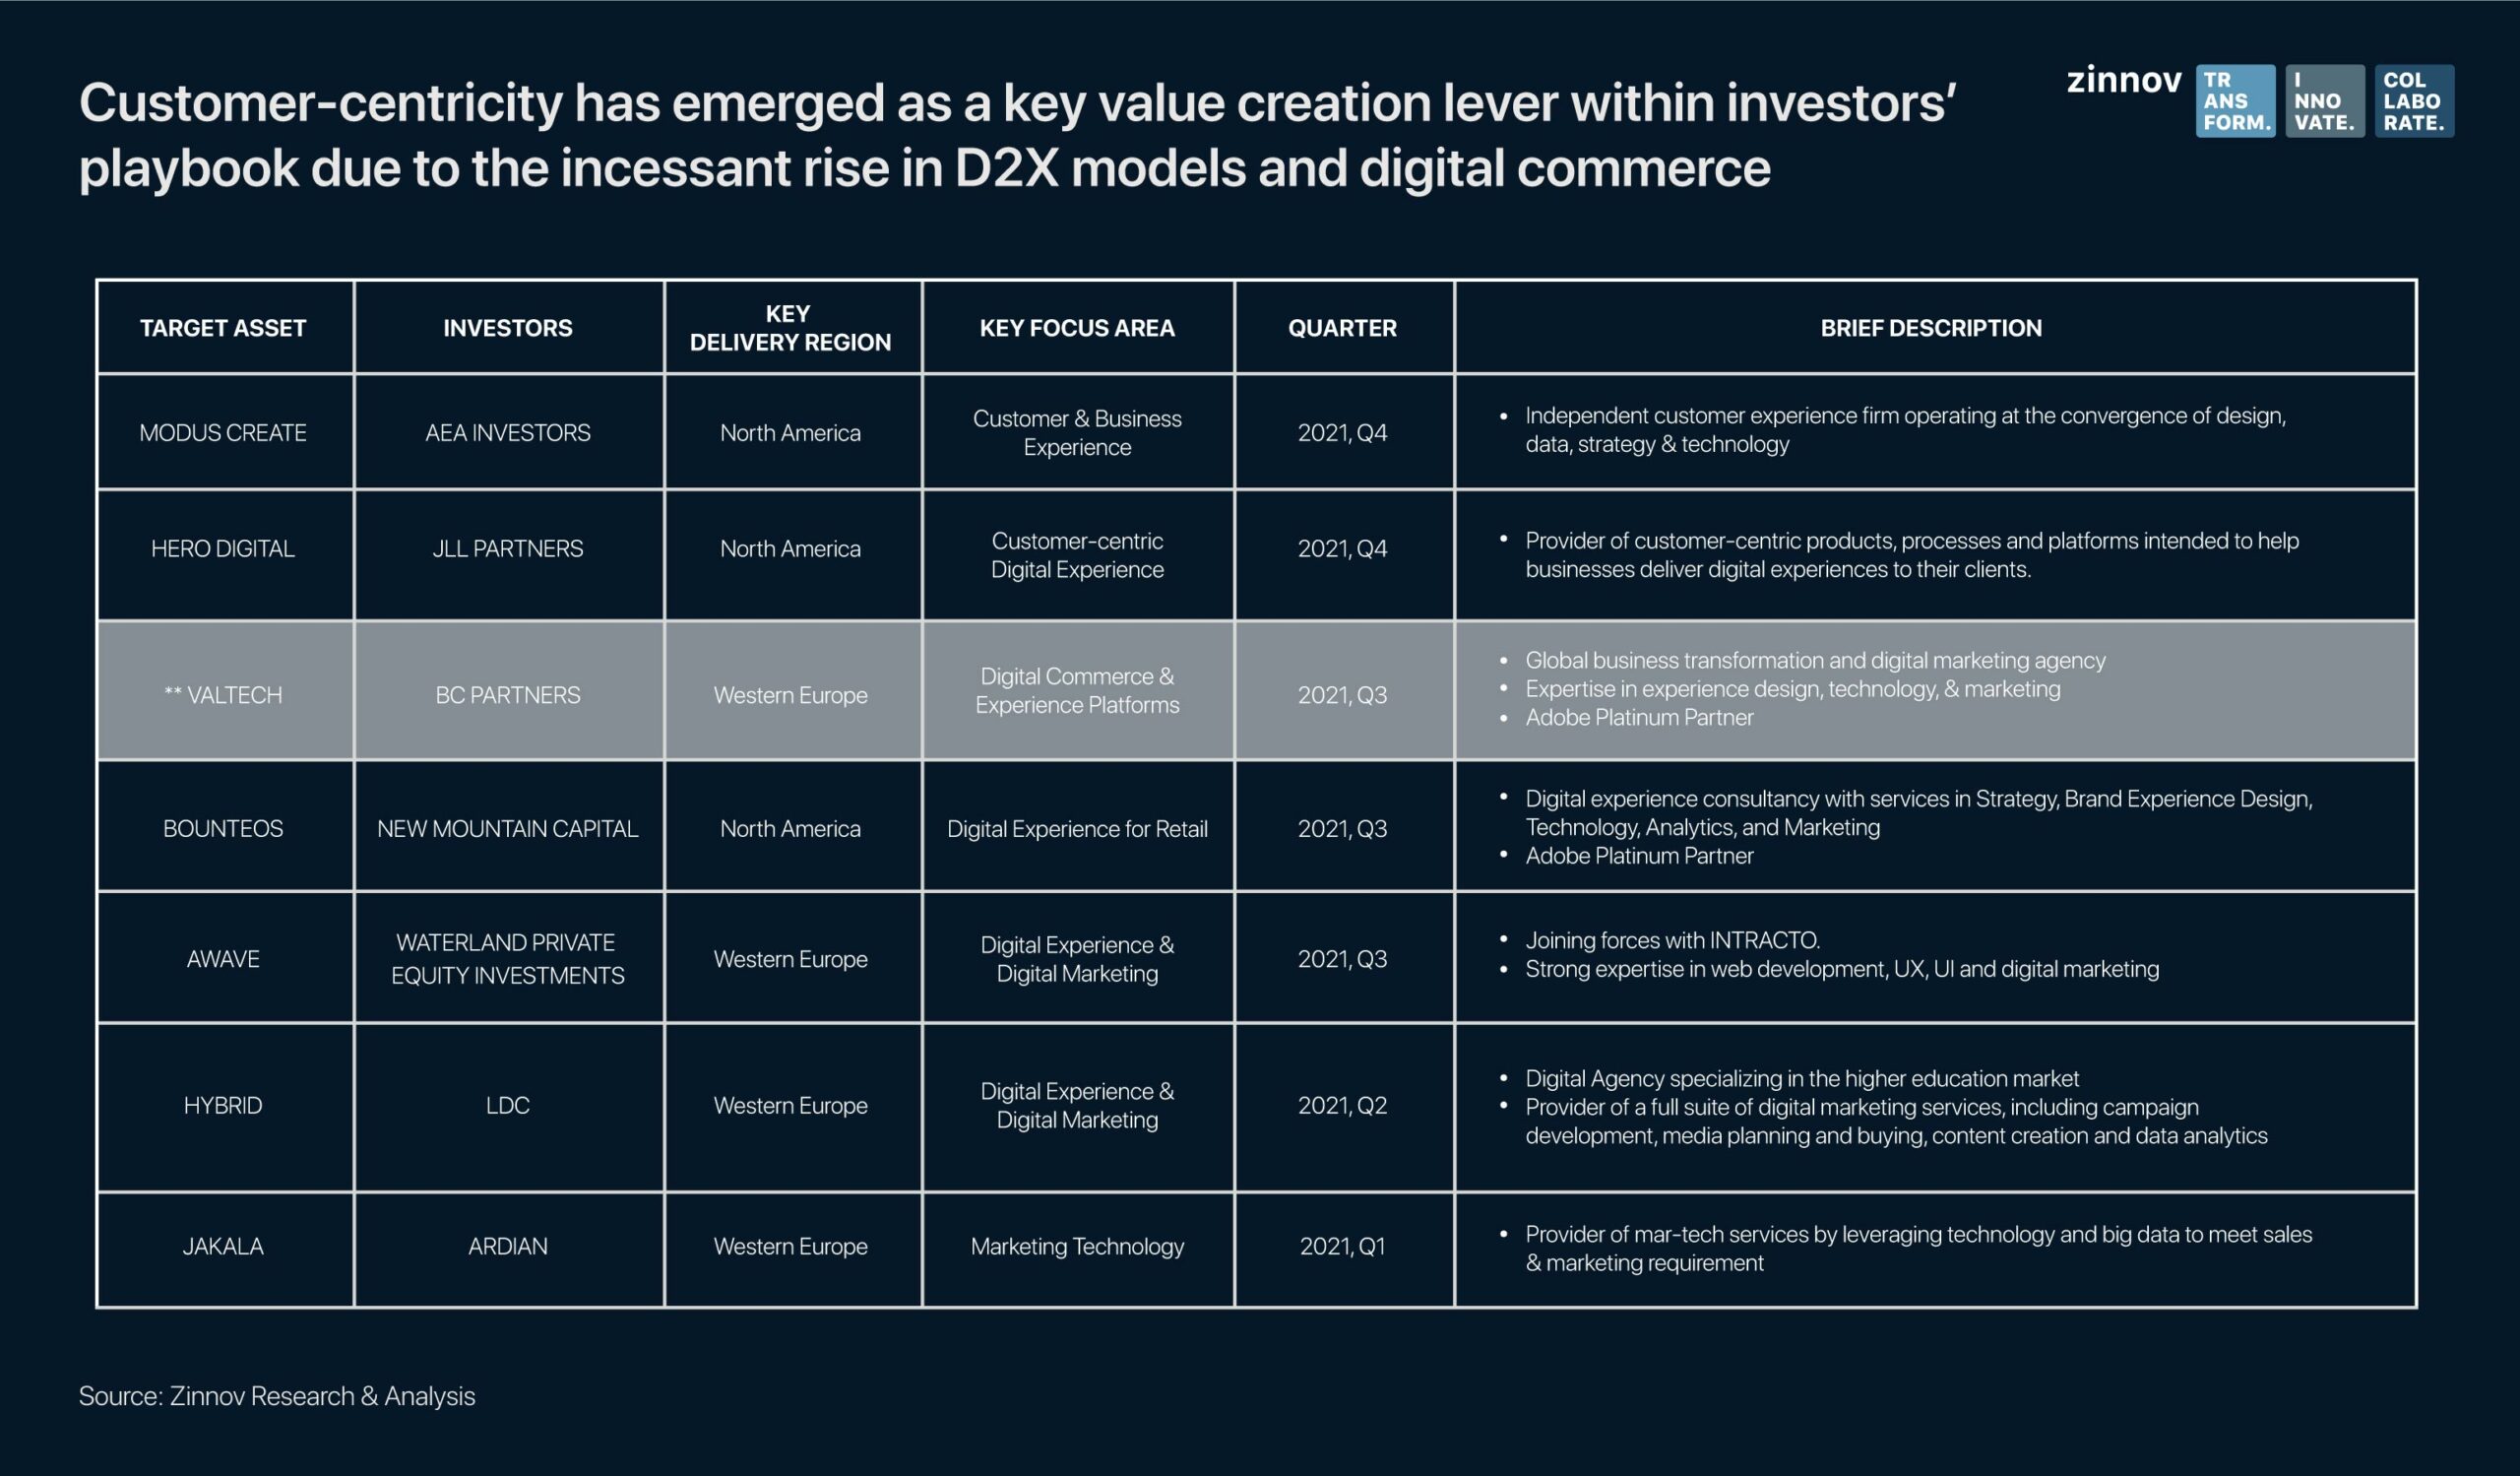 Customer-centricity has merged as a key value creation lever within investors